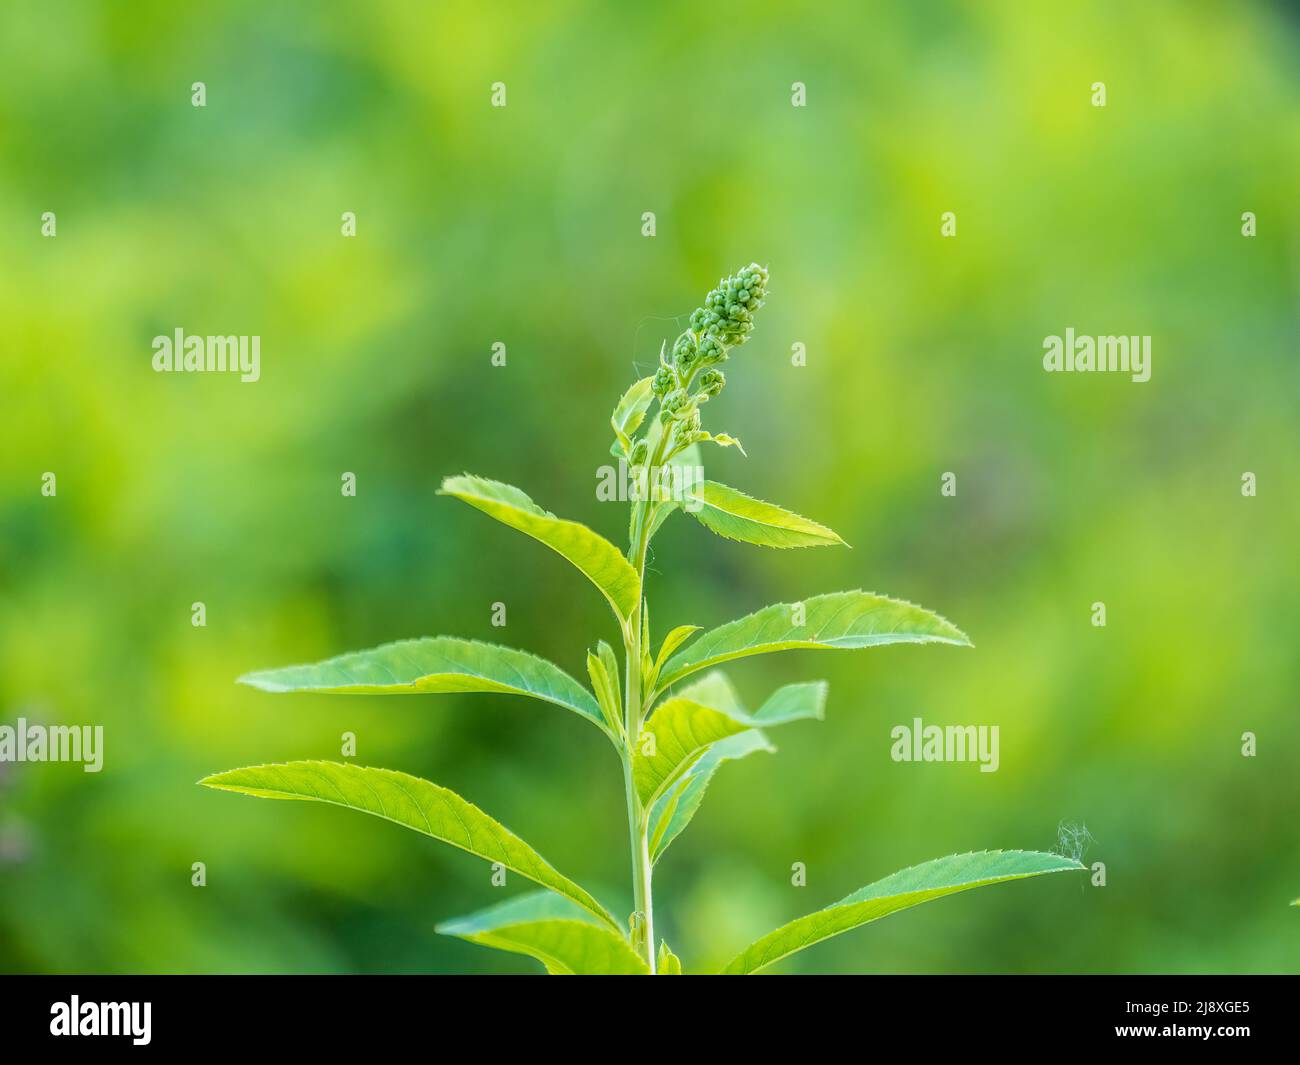 Young plants with green fresh shoots of Spiraea salicifolia, or bridewort, willowleaf meadowsweet Stock Photo